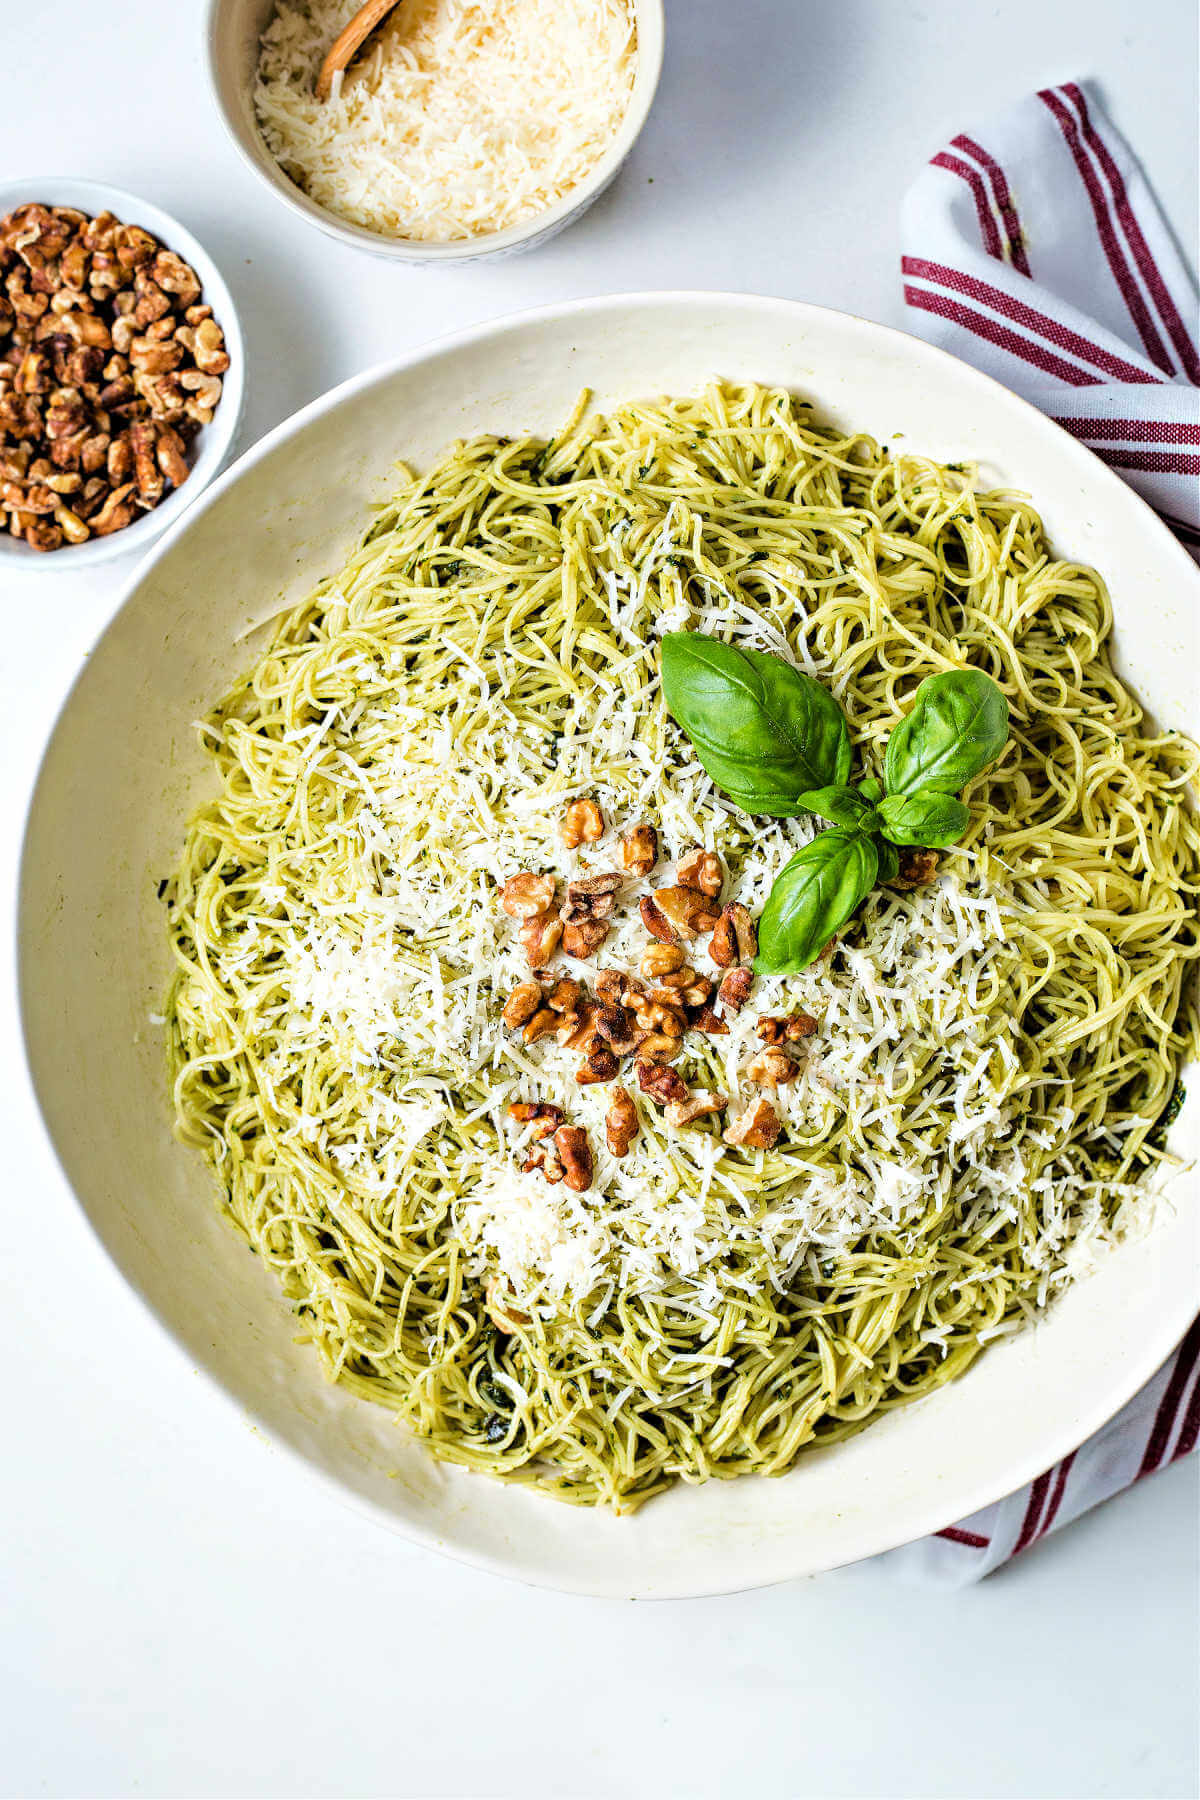 basil pesto pasta in a white bowl on a table that has been garnished with parmesan cheese and toasted walnuts.